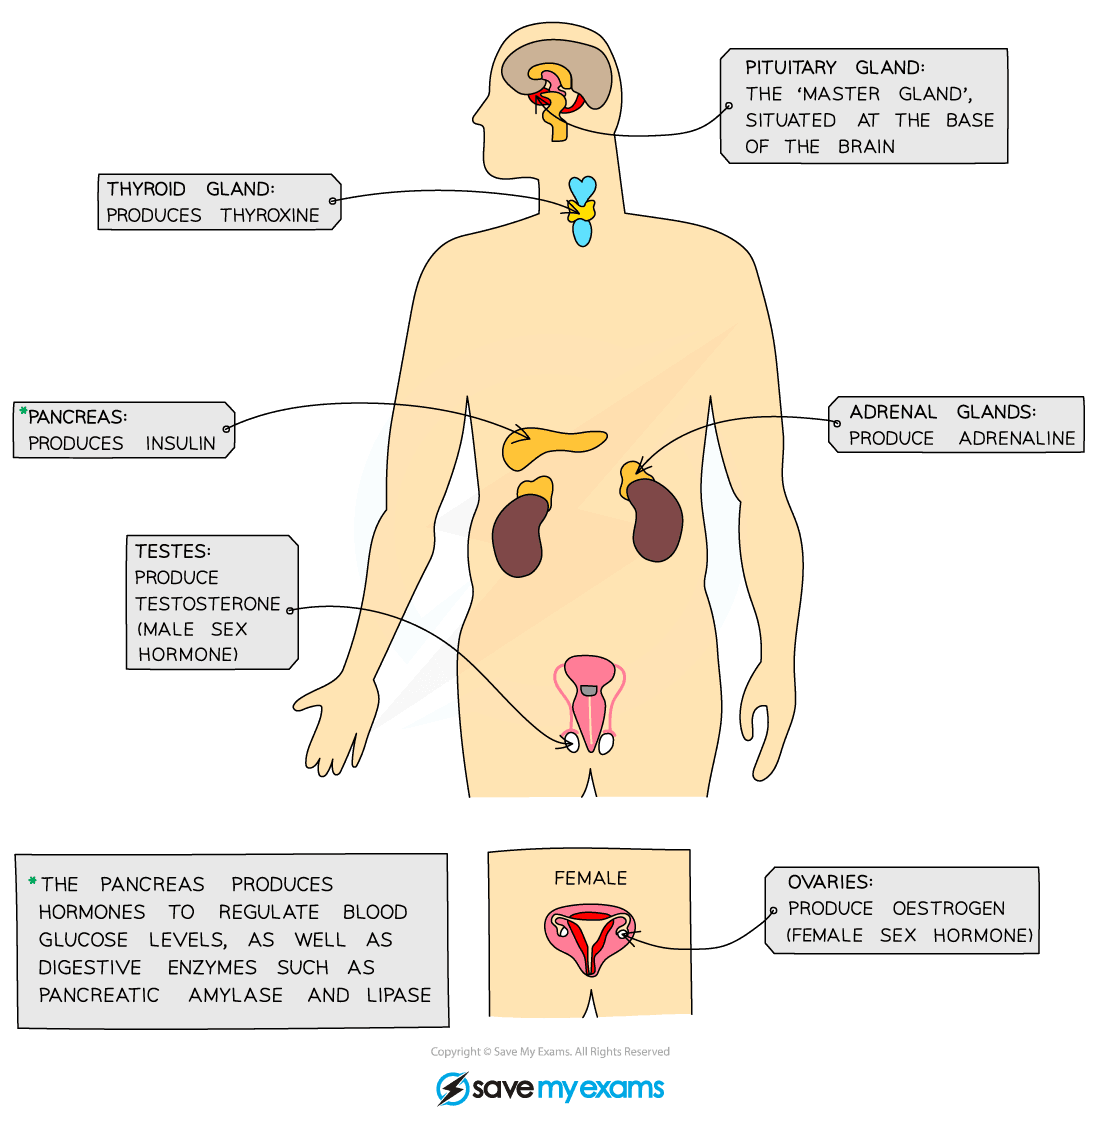 The major endocrine glands in the body